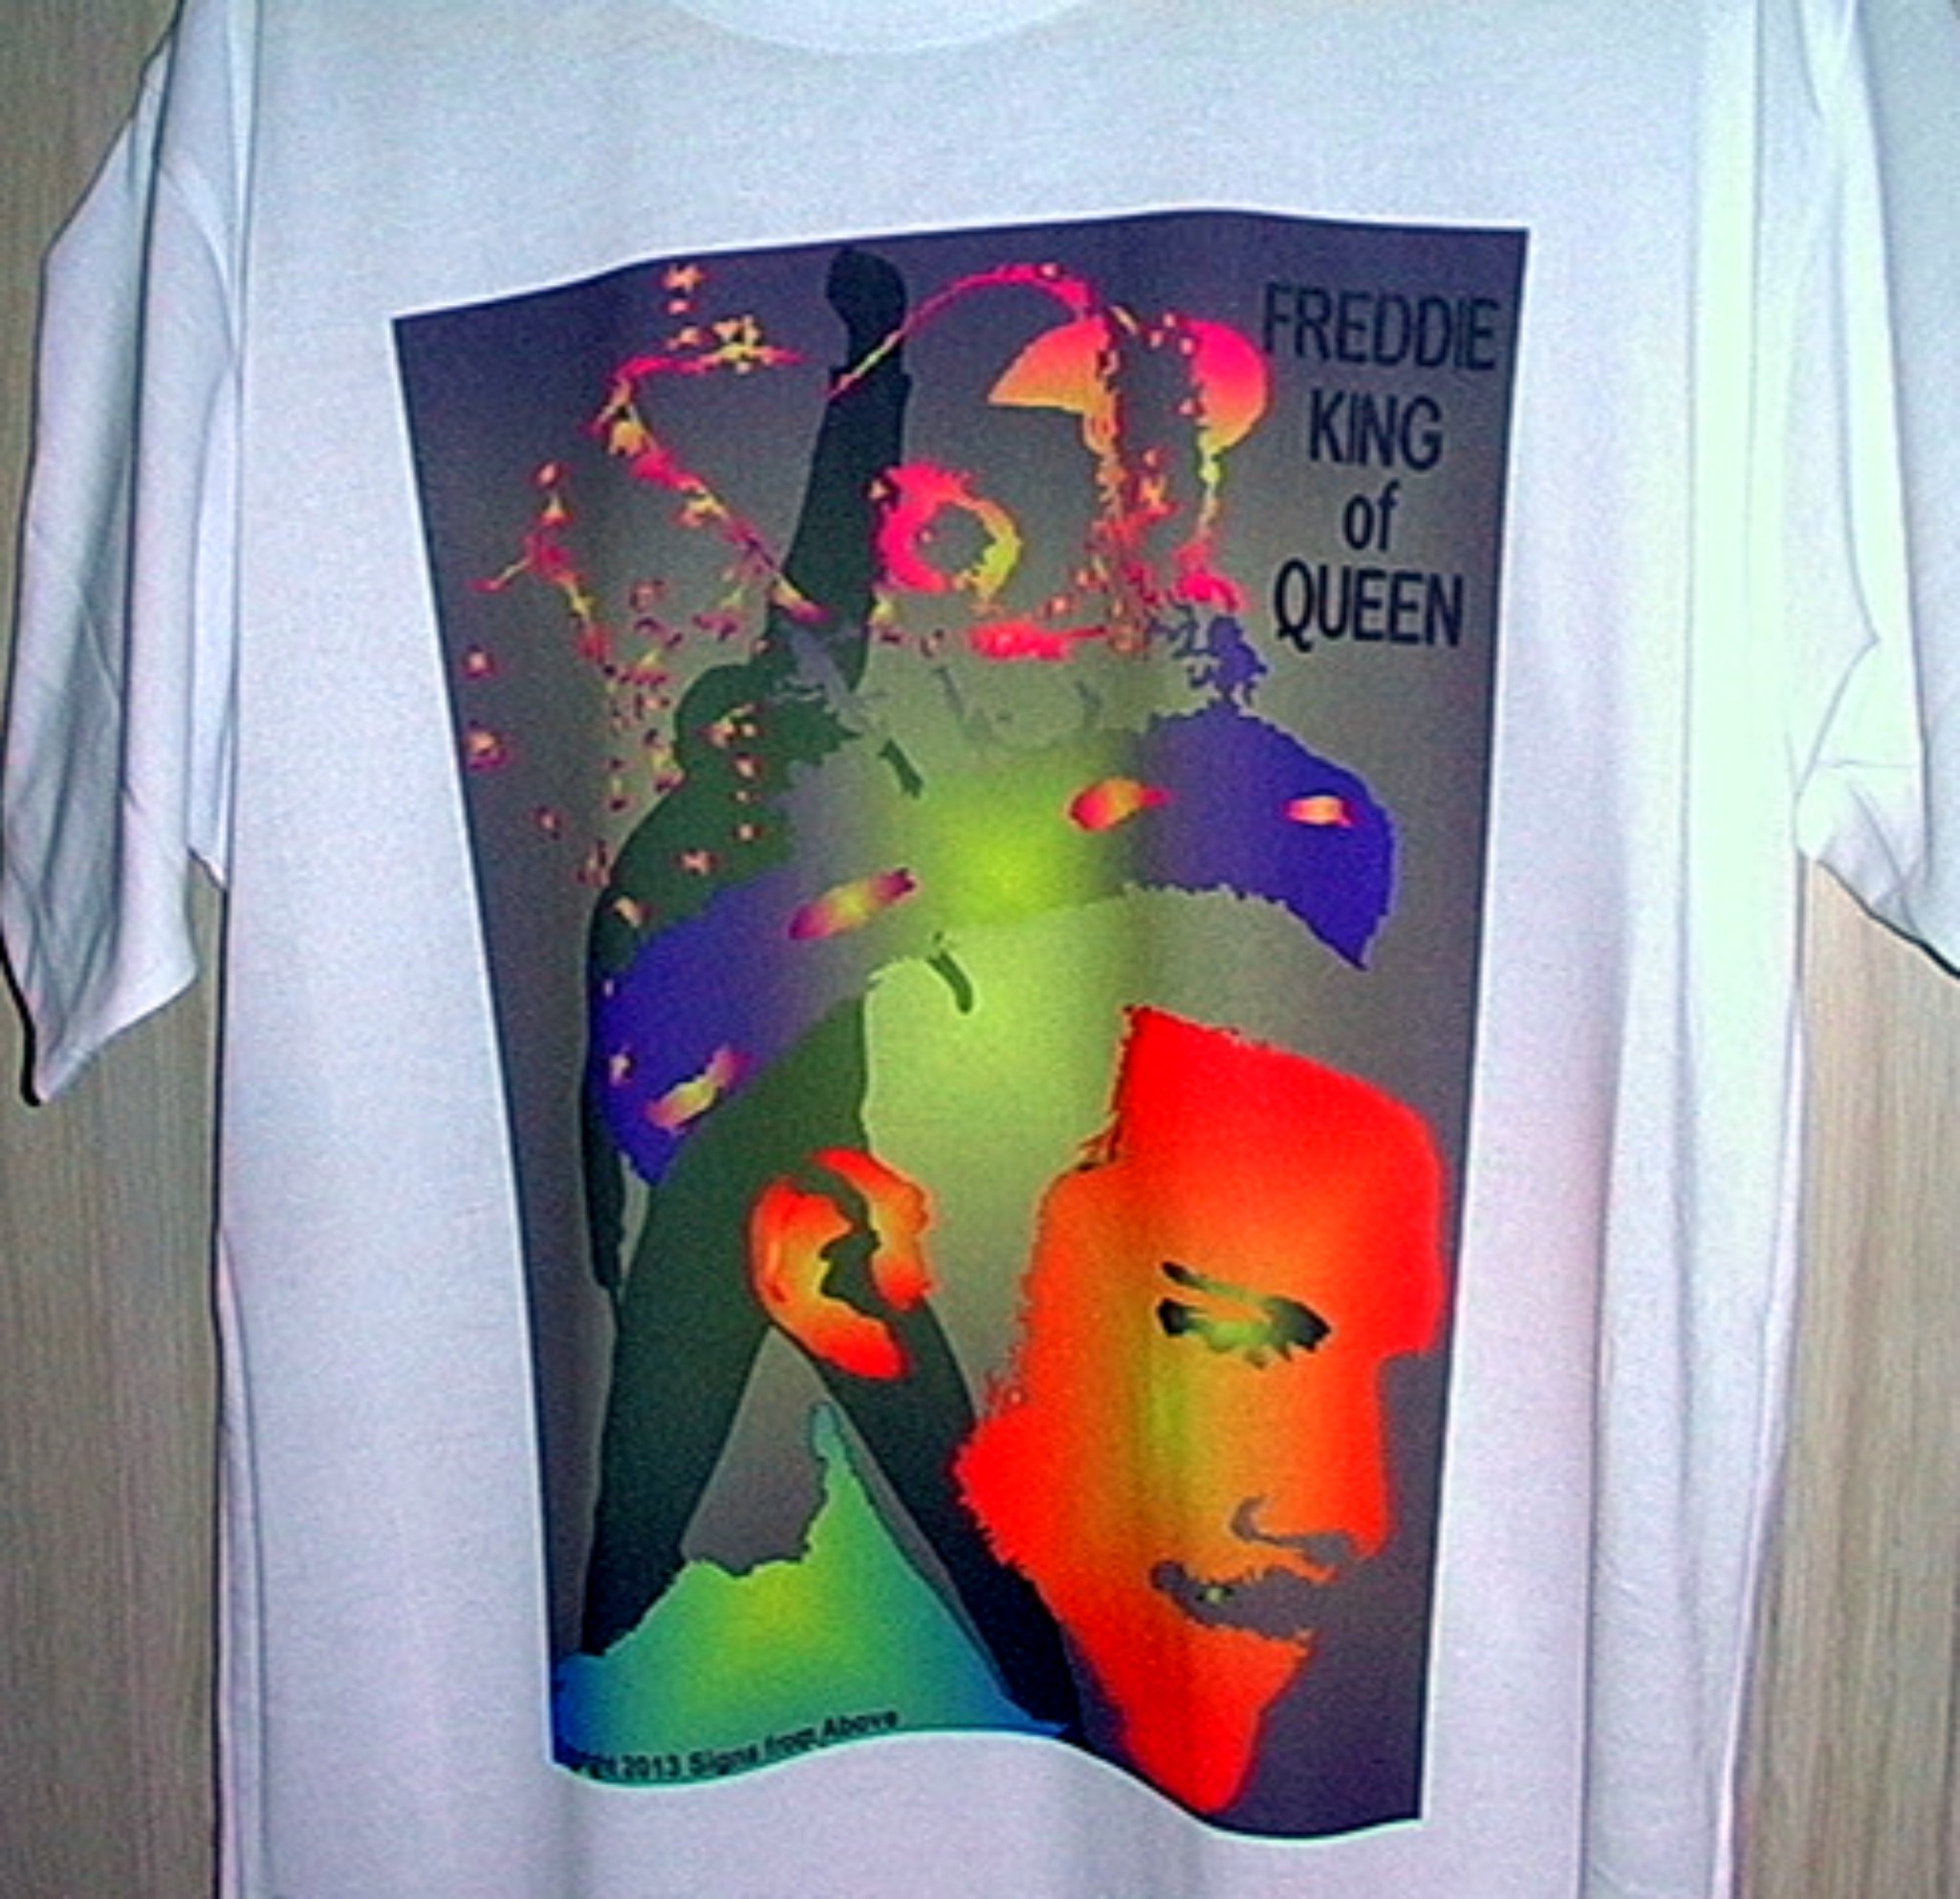 Freddie from Queen Shirt made with sublimation printing